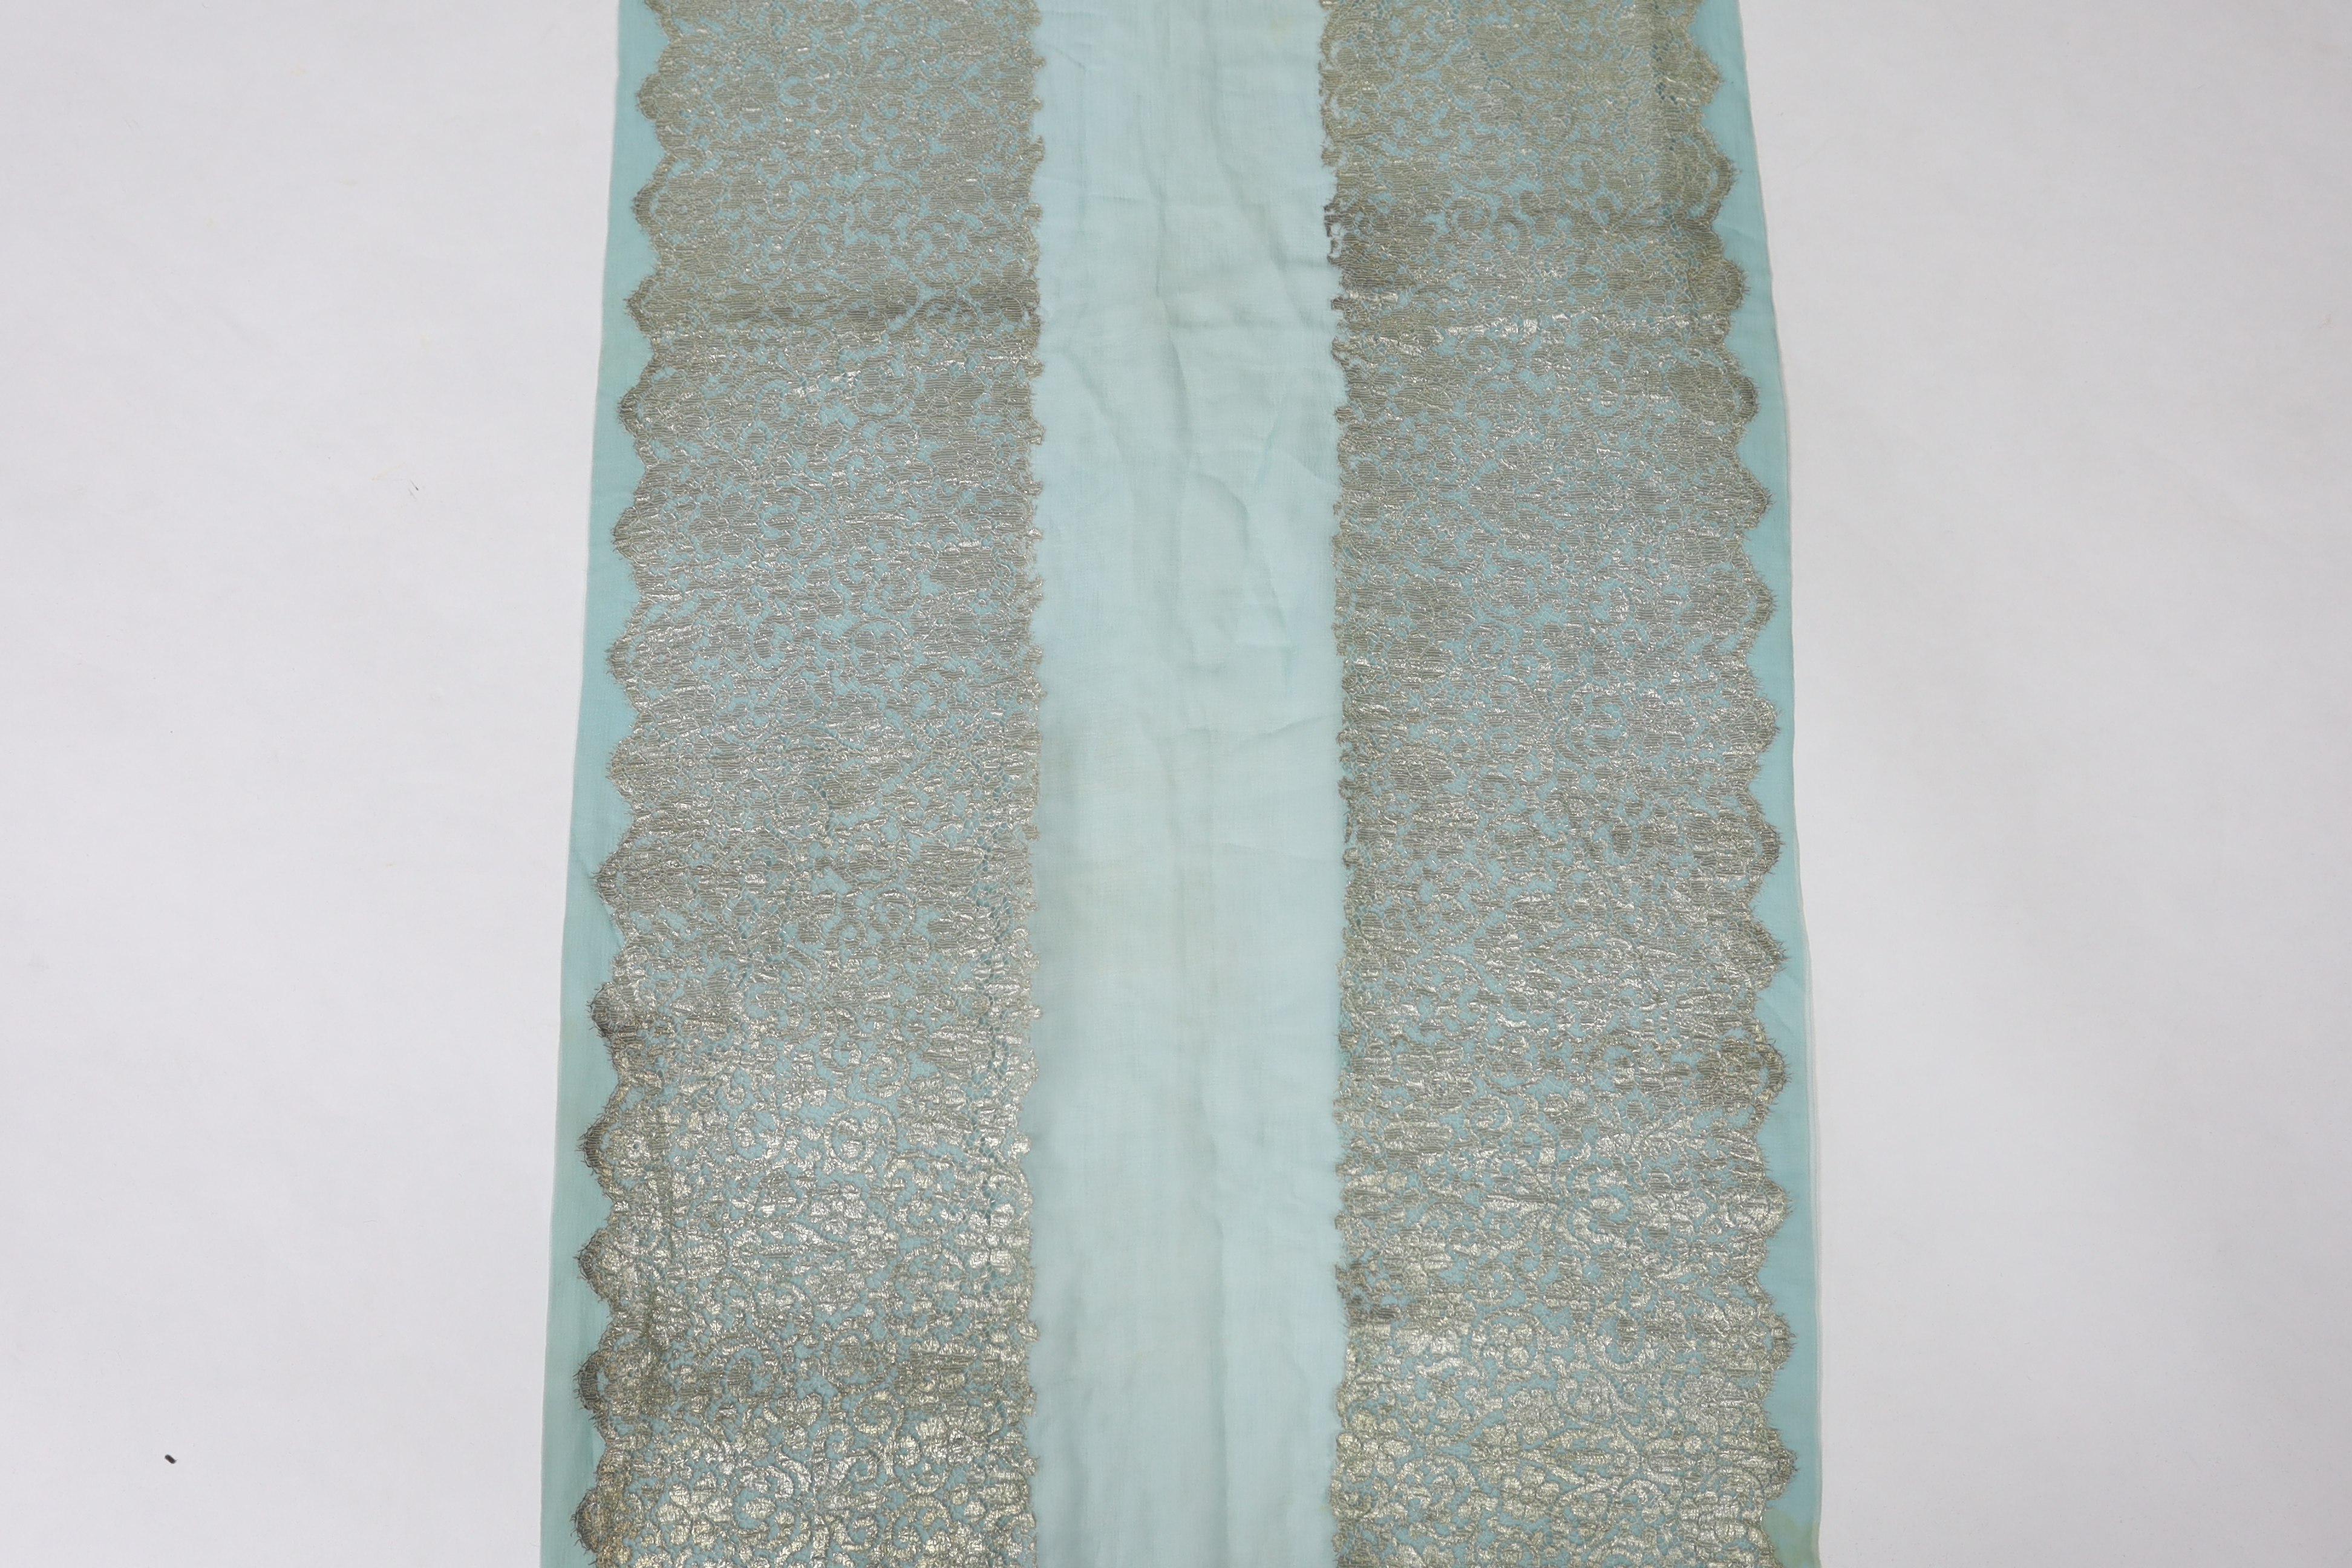 A 1920's silver machine lace and chiffon train, to an evening dress, the silver lace has been cut and appliquéd onto the turquoise chiffon, 209cm long